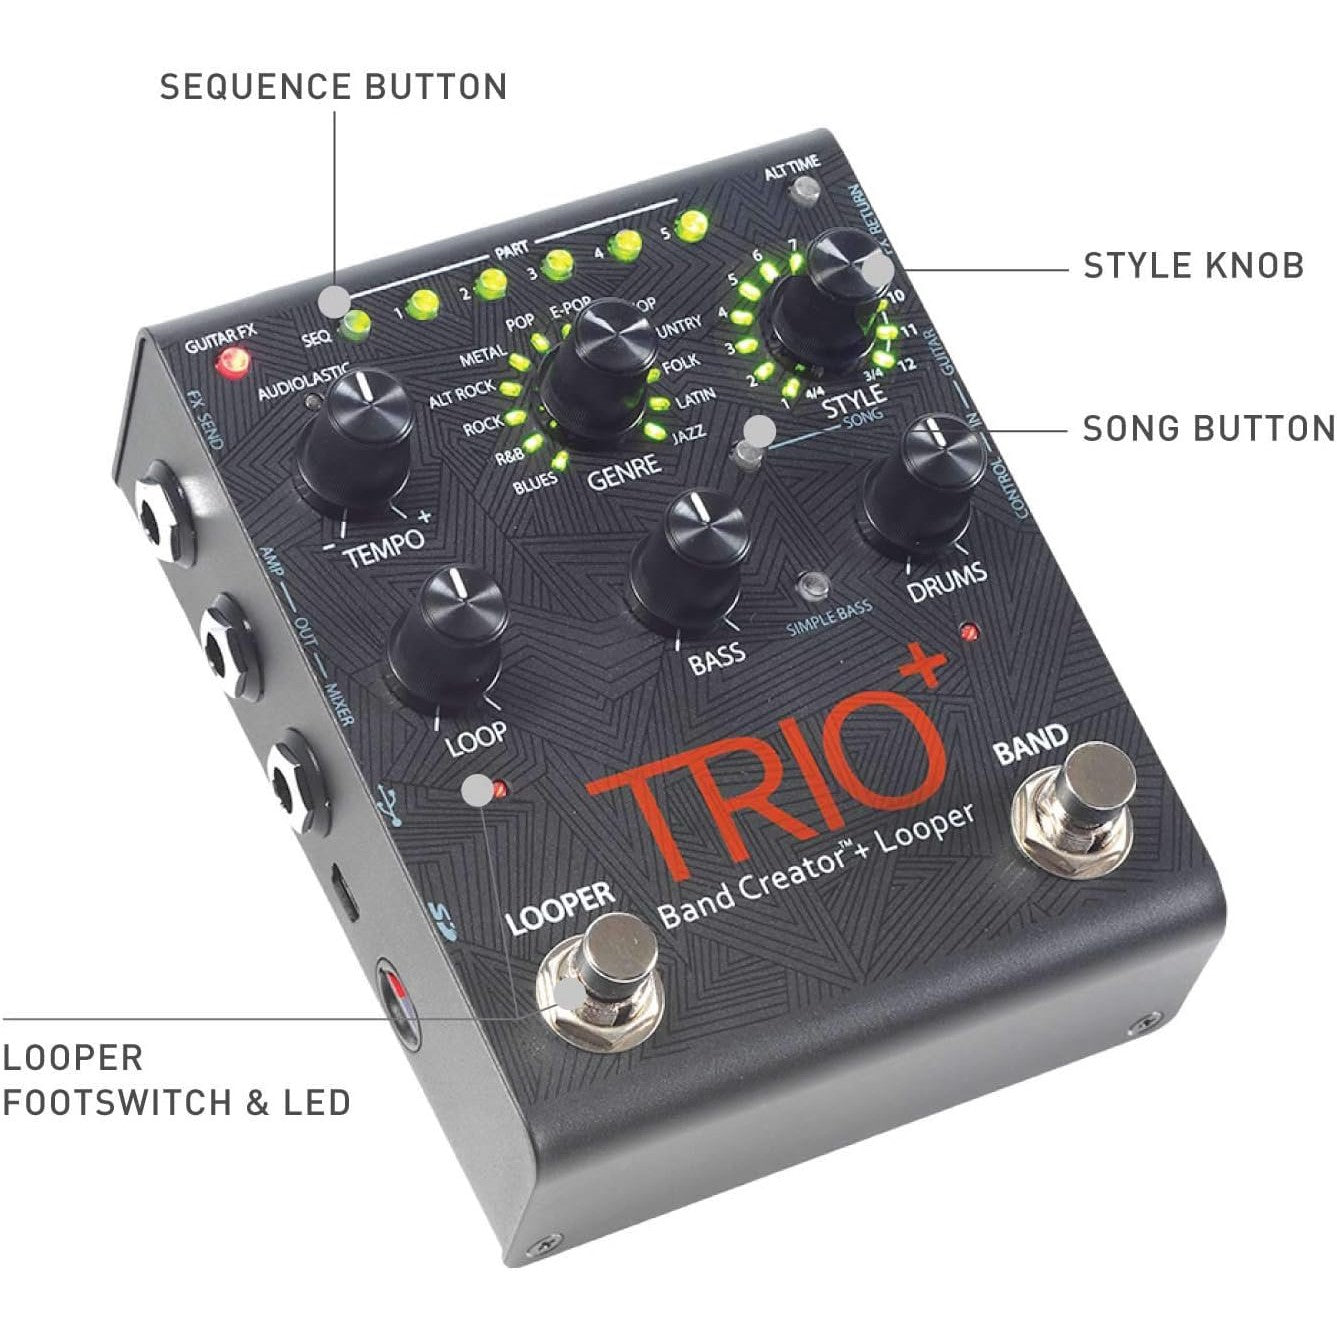 Digitech TRIO Electric Guitar Multi Effect, Band Creator Pedal, Power Supply Included